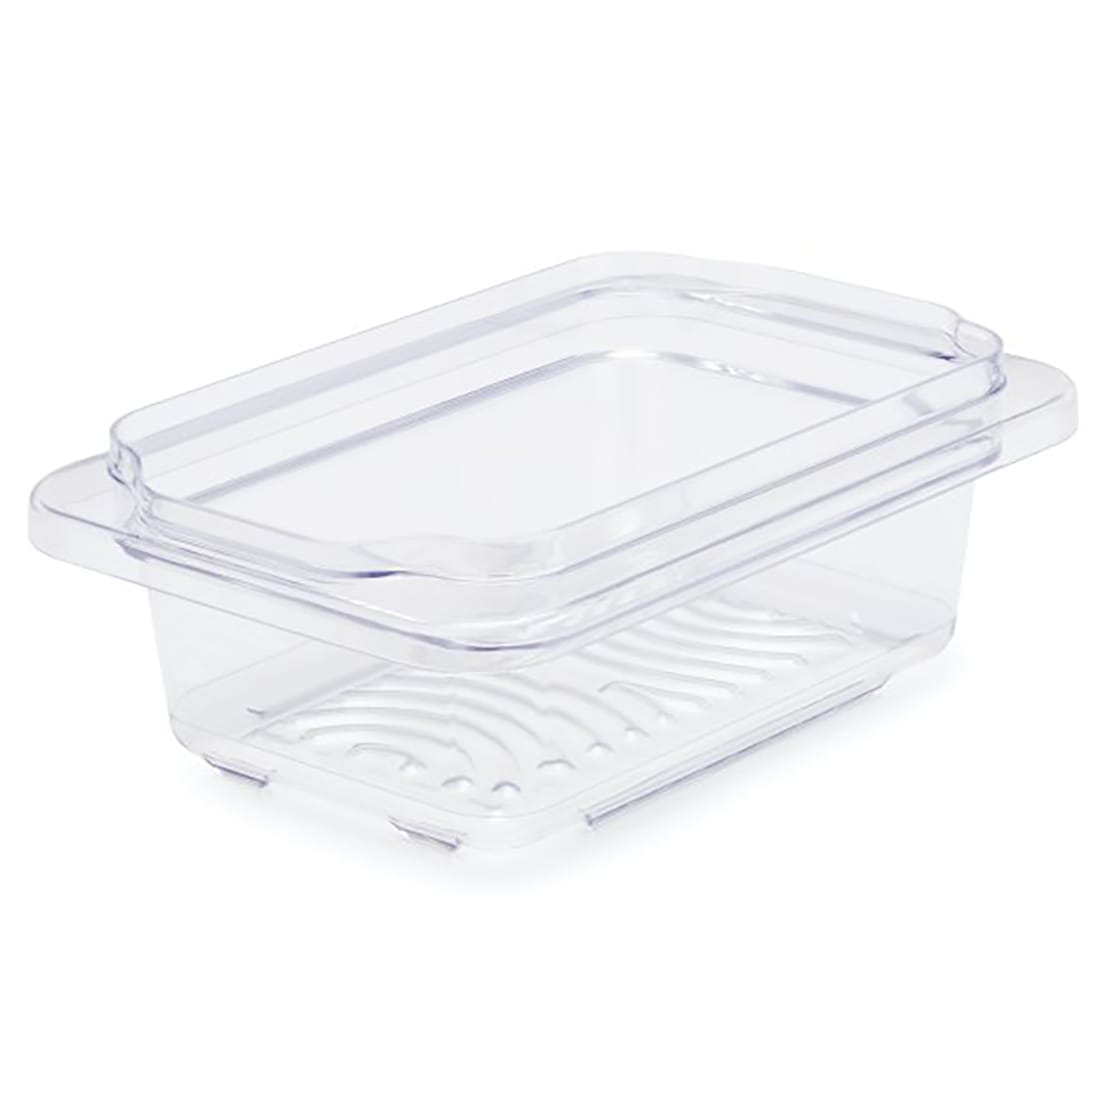 Rubbermaid 2052935 FreshWorks 3 Gallon Container